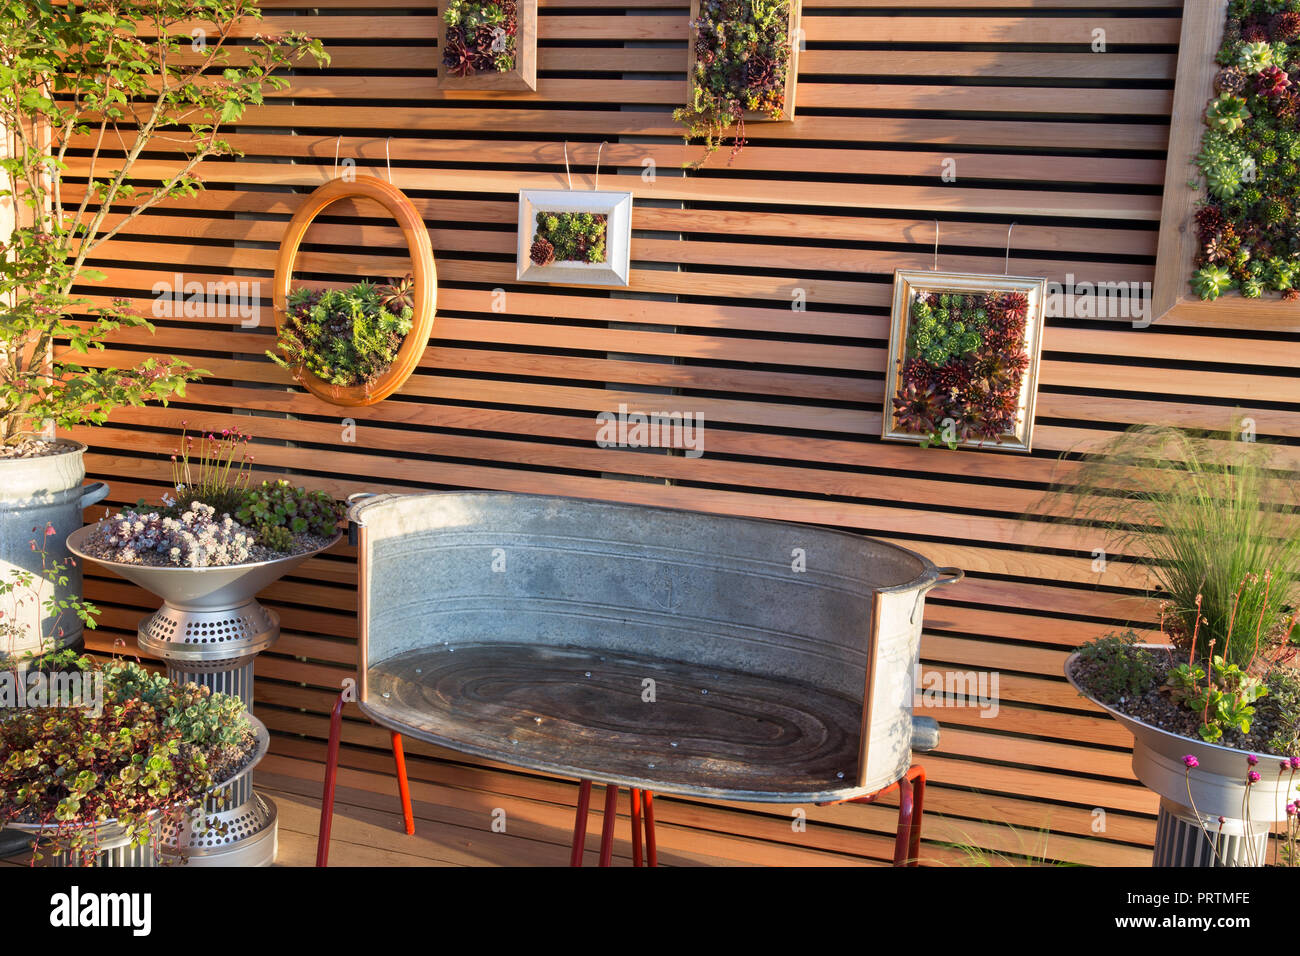 Balcony garden repurposed recycled furniture and containers succulents and herbs. Sempervivum and mixed succulent plants vertical gardening UK Stock Photo